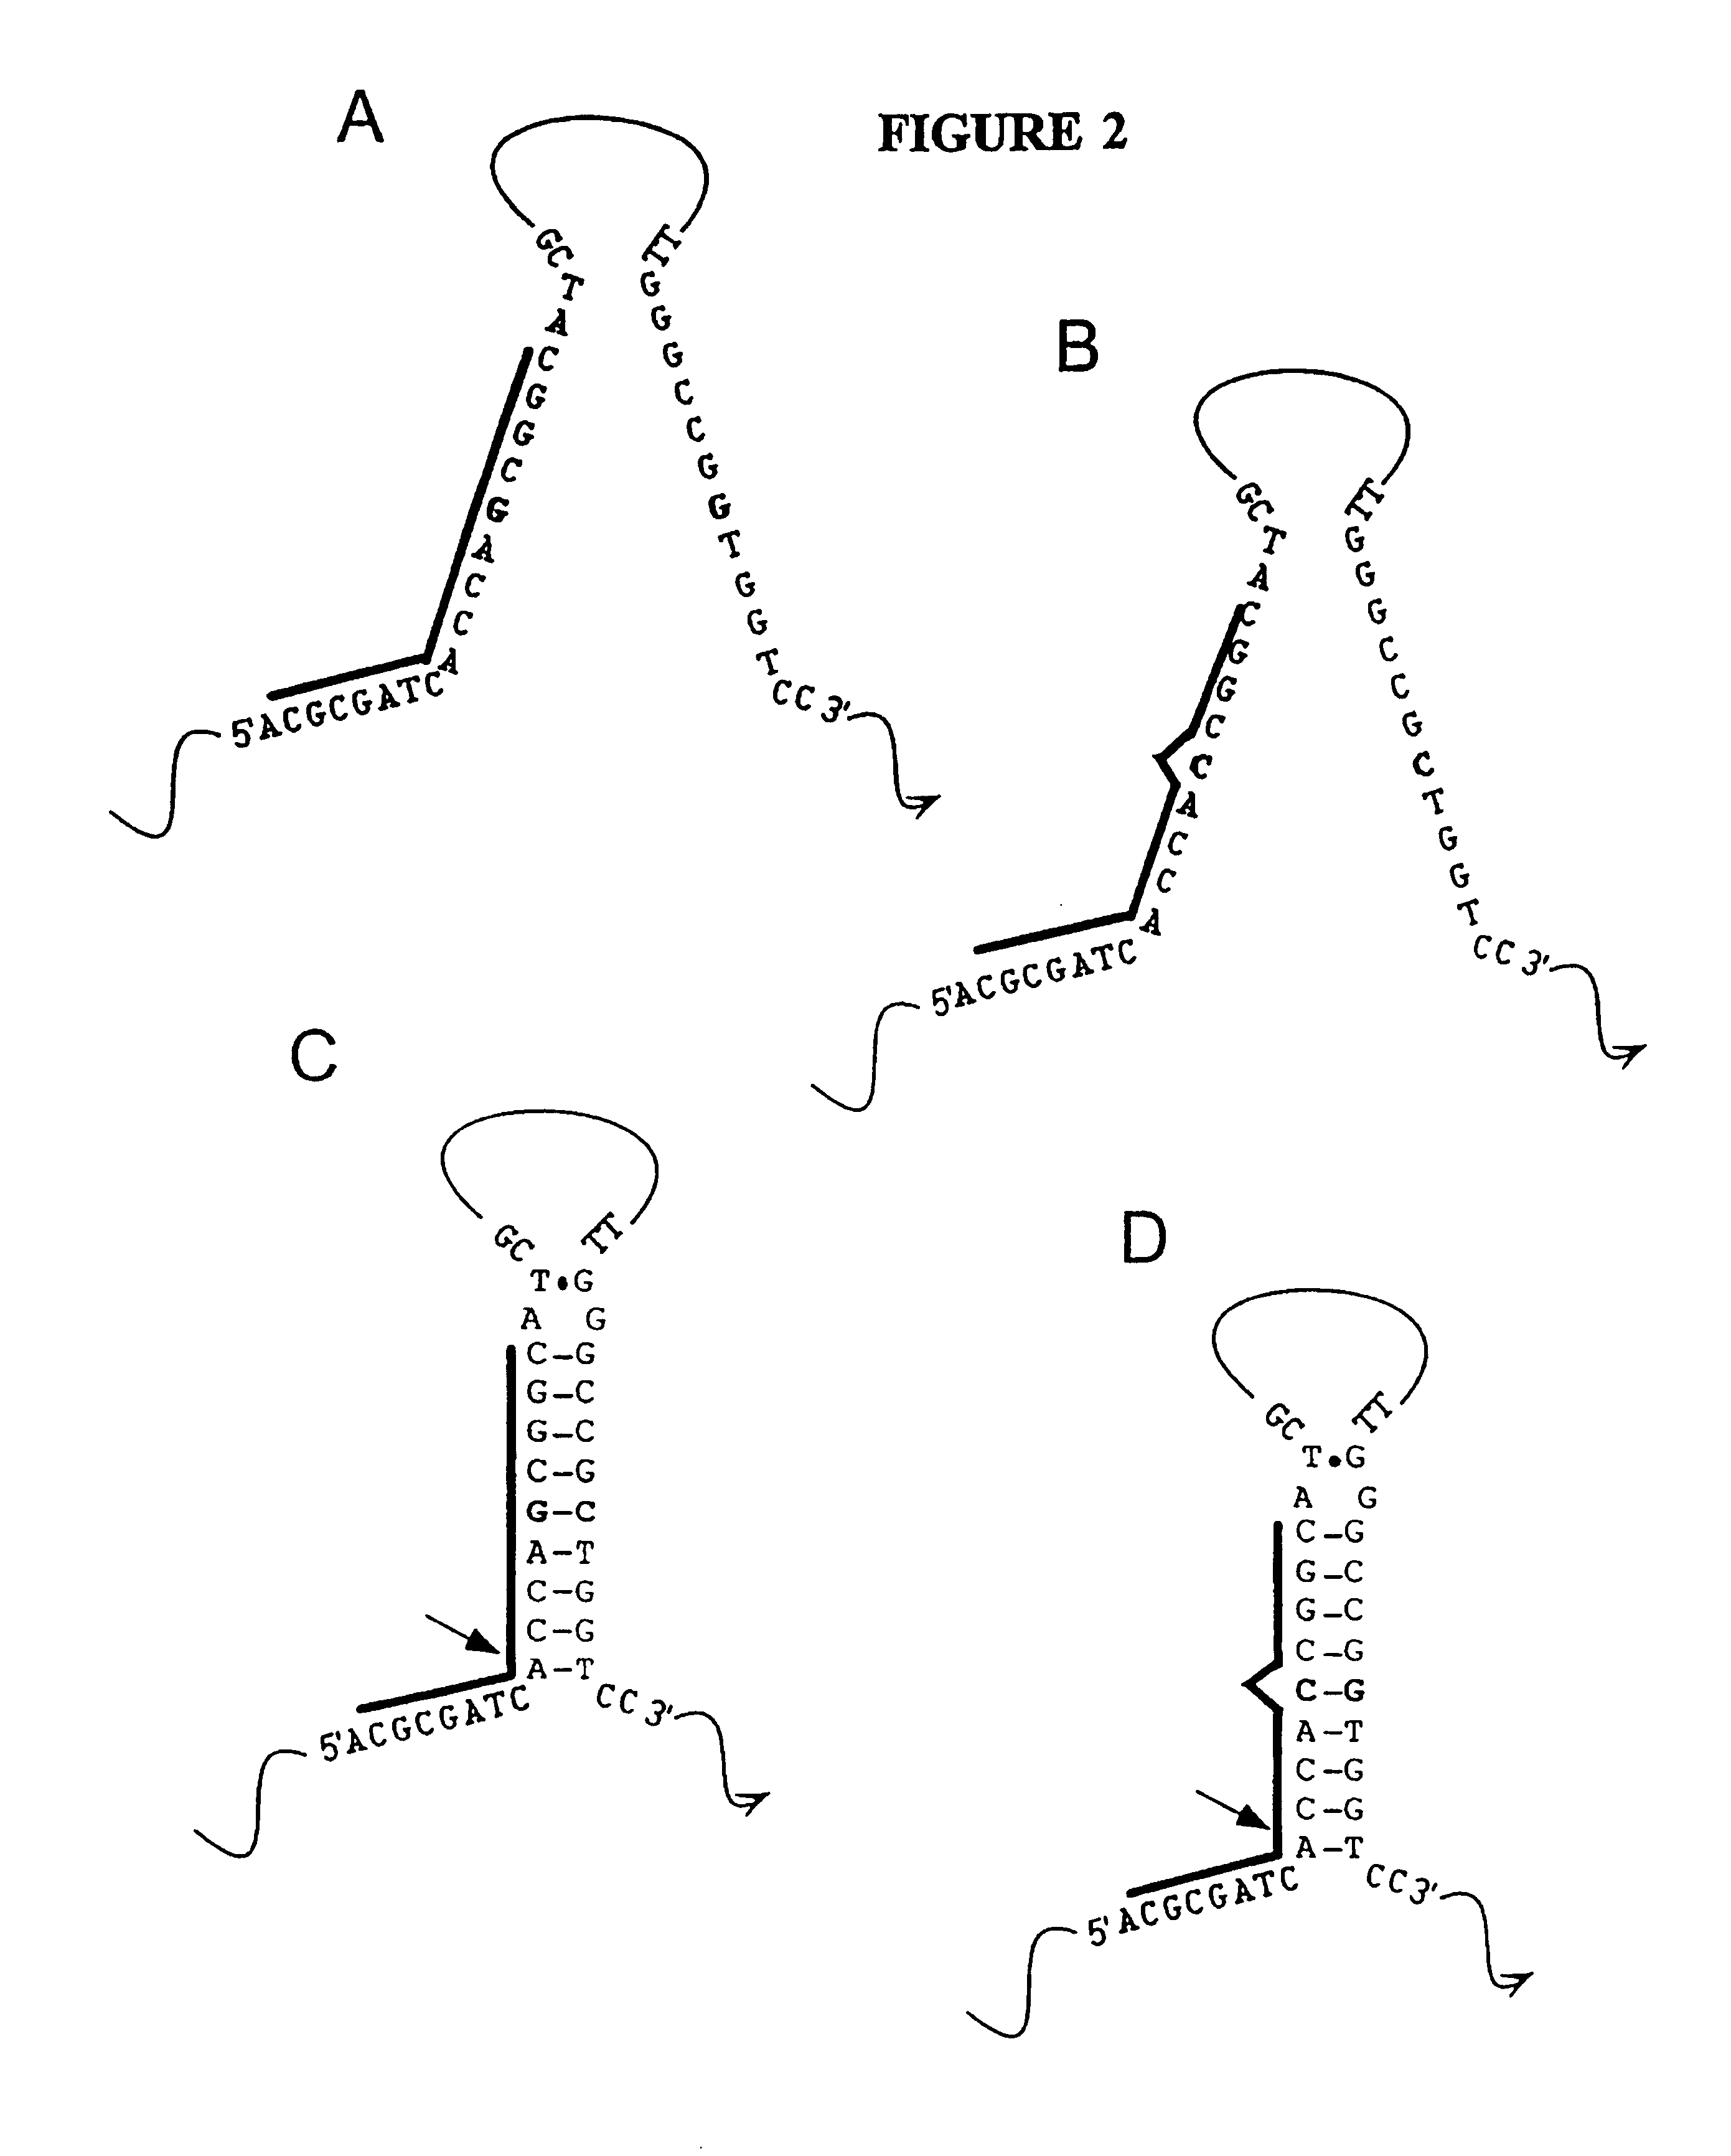 Nucleic acid accessible hybridization sites